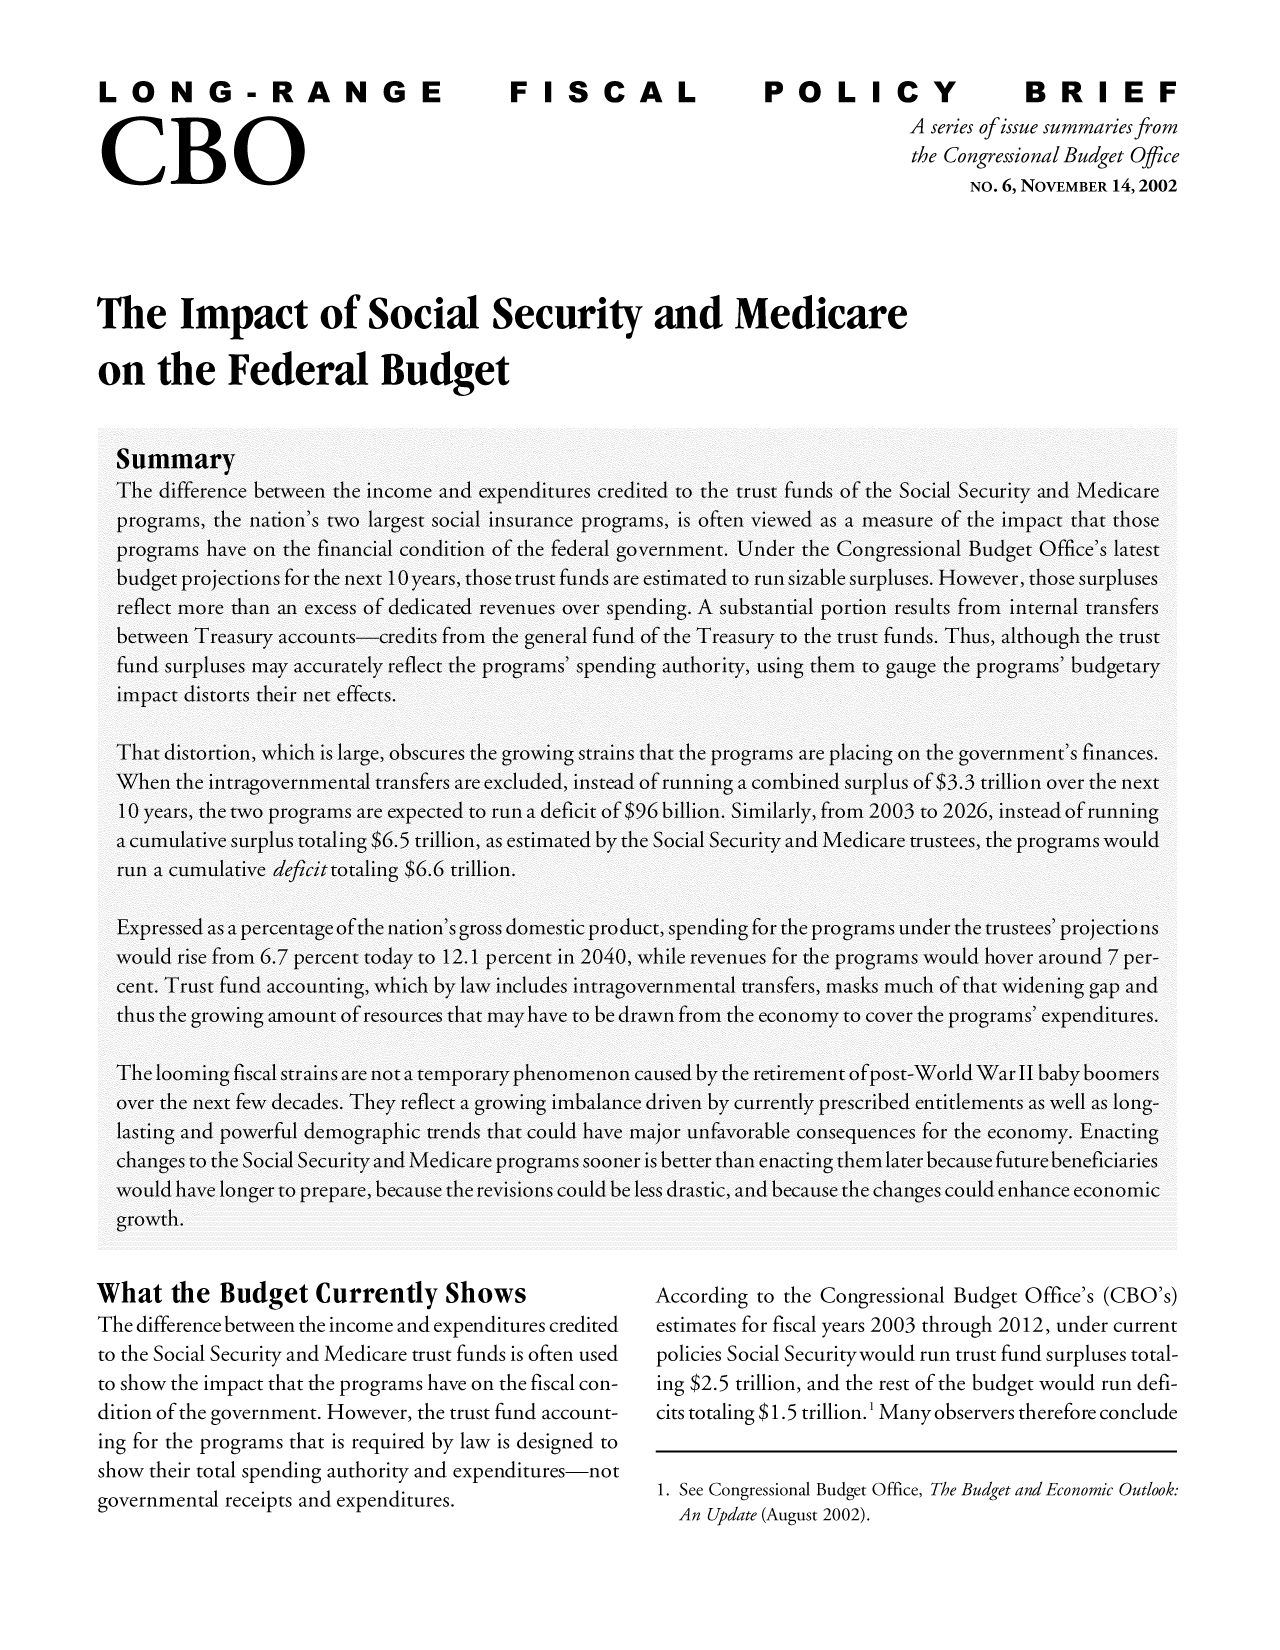 handle is hein.congrec/cbo9253 and id is 1 raw text is: LONG-RA
CBO

F ISCAL

POLICY                    BRIEF
A series ofissue summaries from
the Congressional Budget Office
NO. 6, NOVEMBER 14, 2002

The Impact of Social Security and Medicare
on the Federal Budget

What the Budget Currently Shows
The difference between the income and expenditures credited
to the Social Security and Medicare trust funds is often used
to show the impact that the programs have on the fiscal con-
dition of the government. However, the trust fund account-
ing for the programs that is required by law is designed to
show their total spending authority and expenditures-not
governmental receipts and expenditures.

According to the Congressional Budget Office's (CBO's)
estimates for fiscal years 2003 through 2012, under current
policies Social Securitywould run trust fund surpluses total-
ing $2.5 trillion, and the rest of the budget would run defi-
cits totaling $1.5 trillion.1 Many observers therefore conclude
1. See Congressional Budget Office, The Budget and Economic Outlook:
An Update (August 2002).


